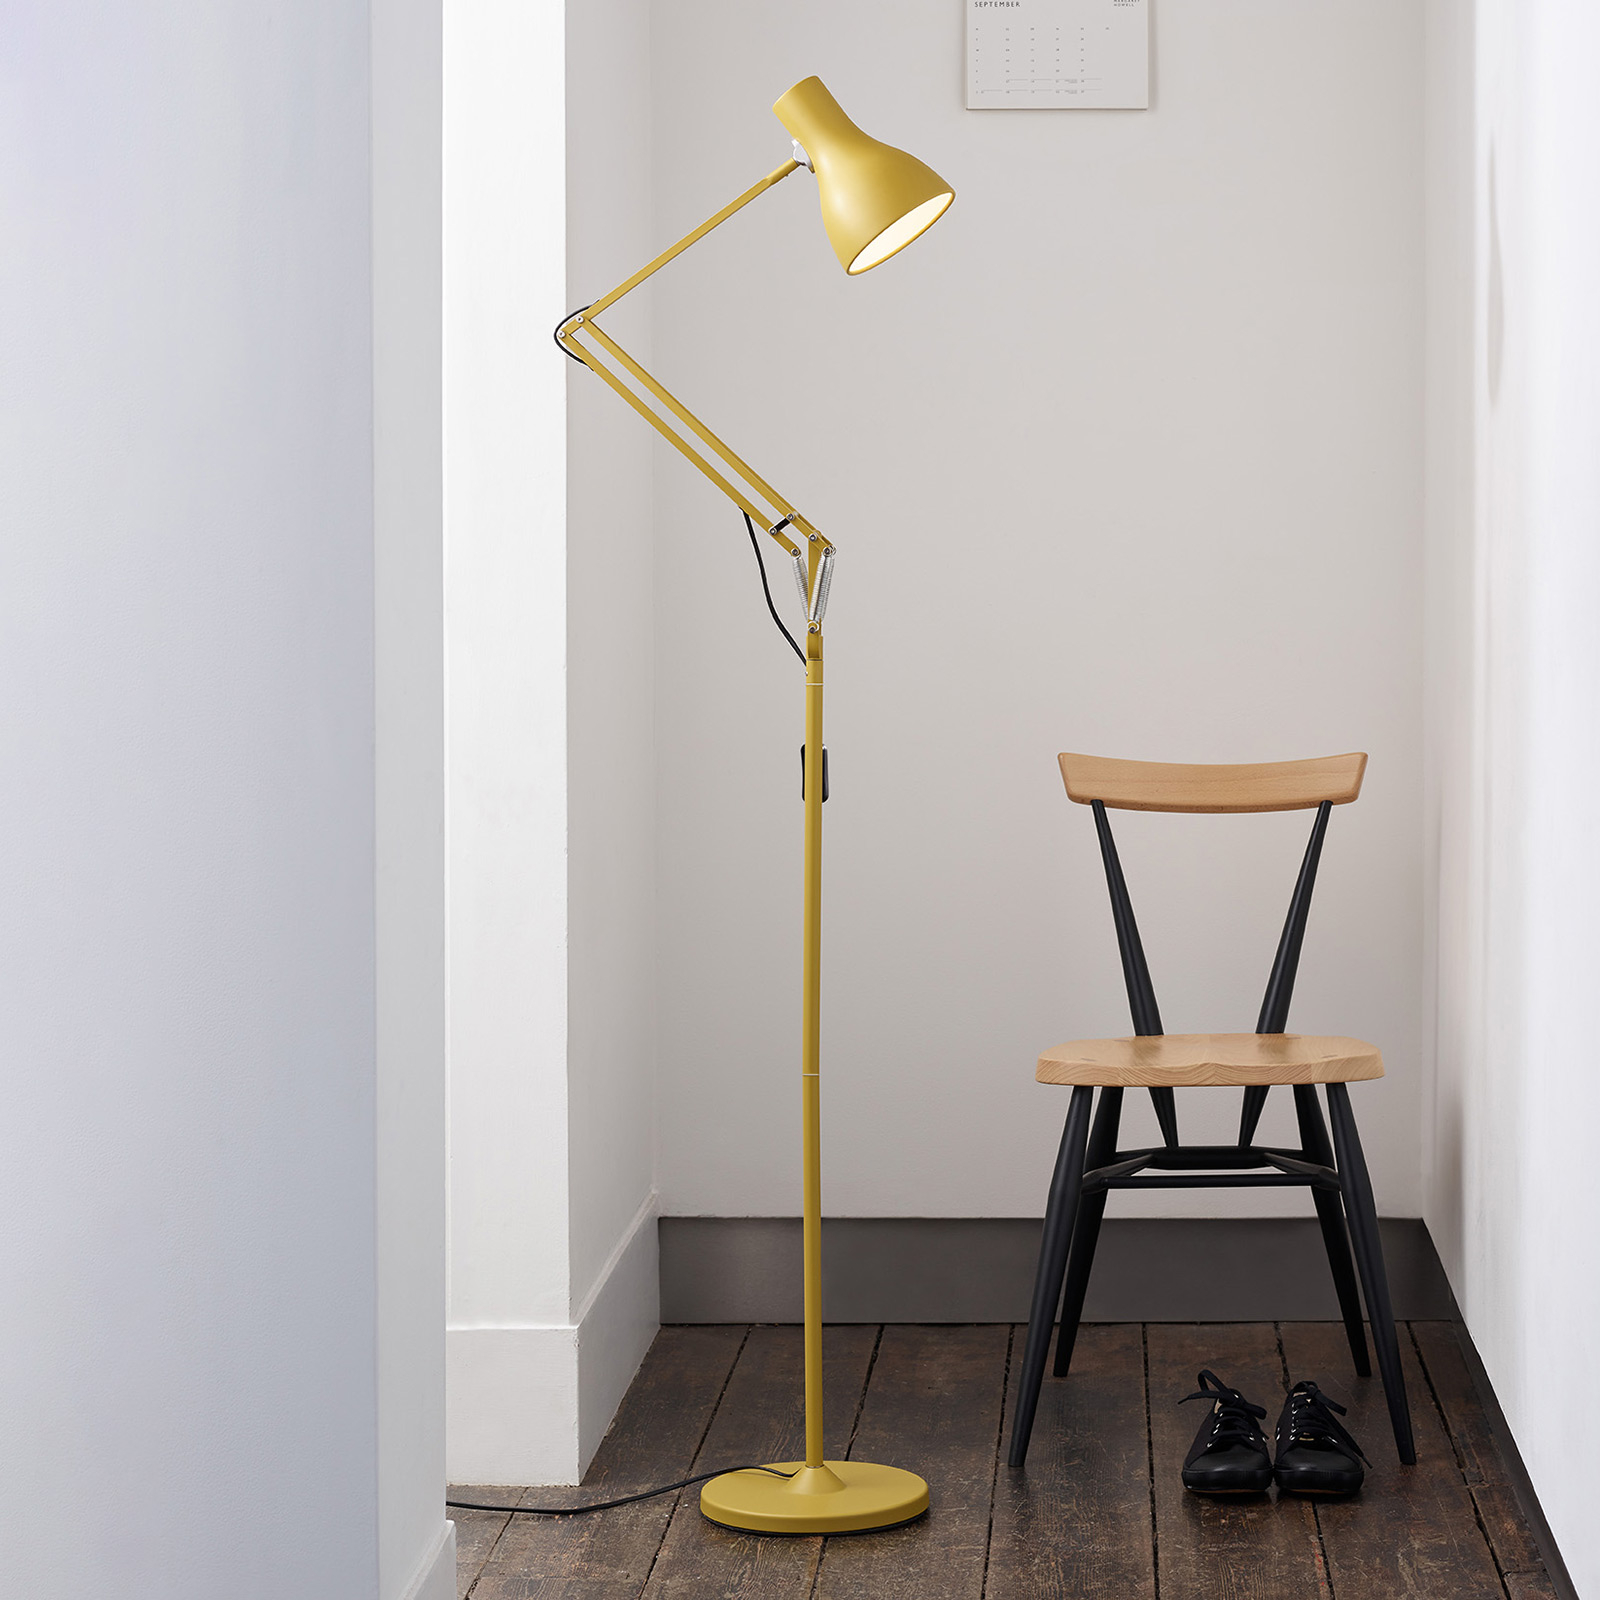 Anglepoise Type 75 Margaret Howell yellow